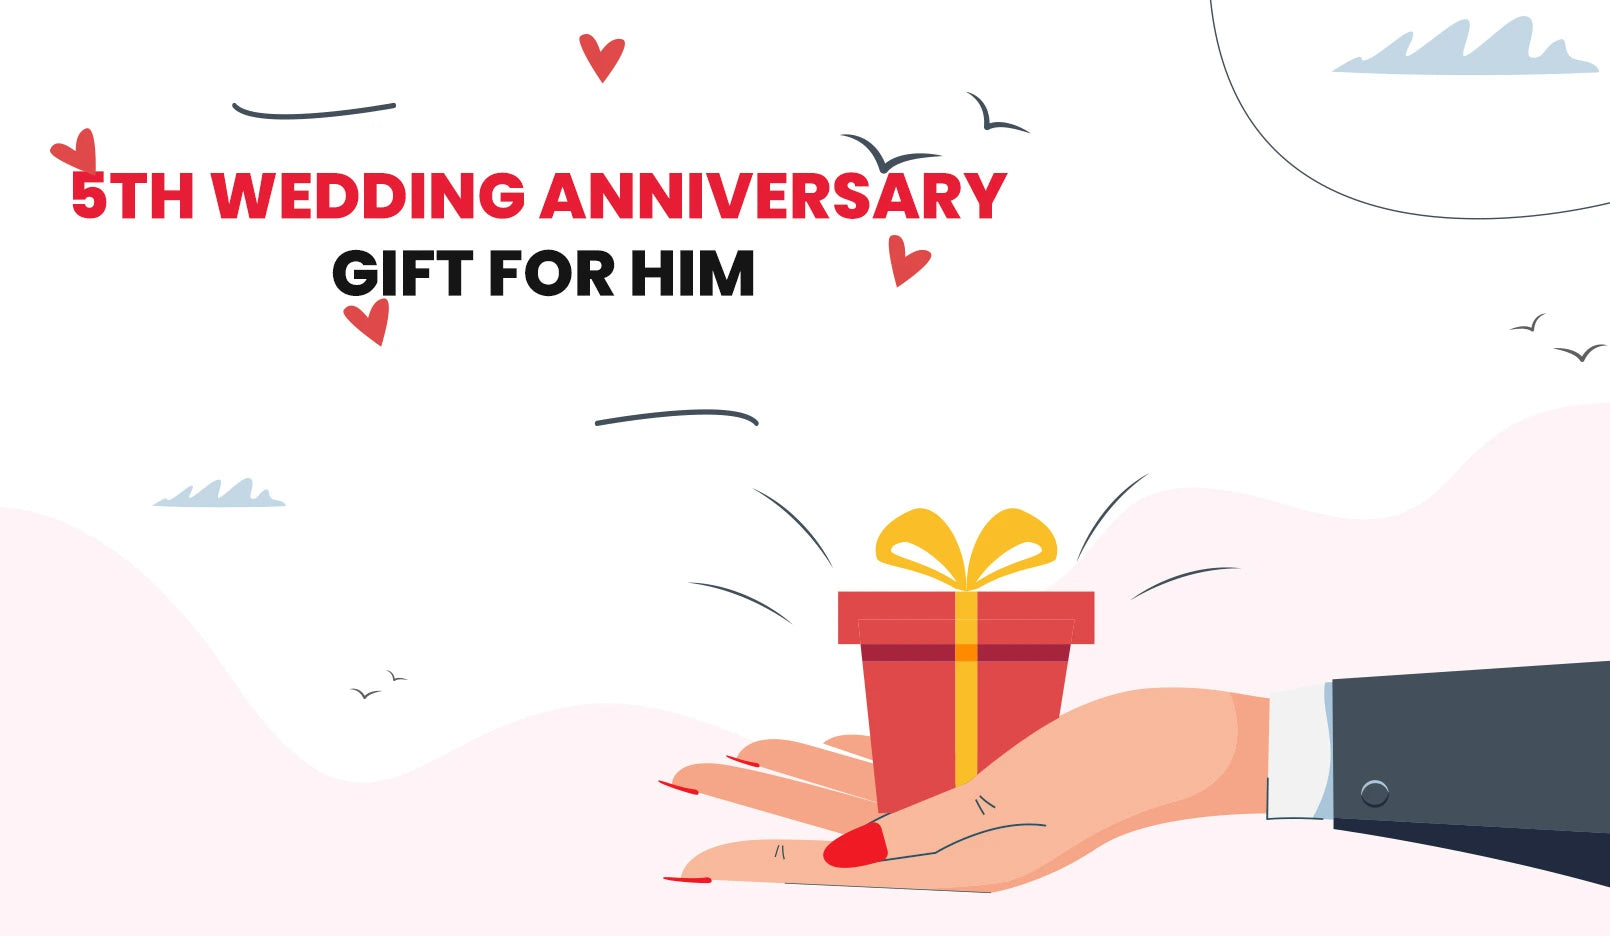 5th Wedding Anniversary Gift for Him